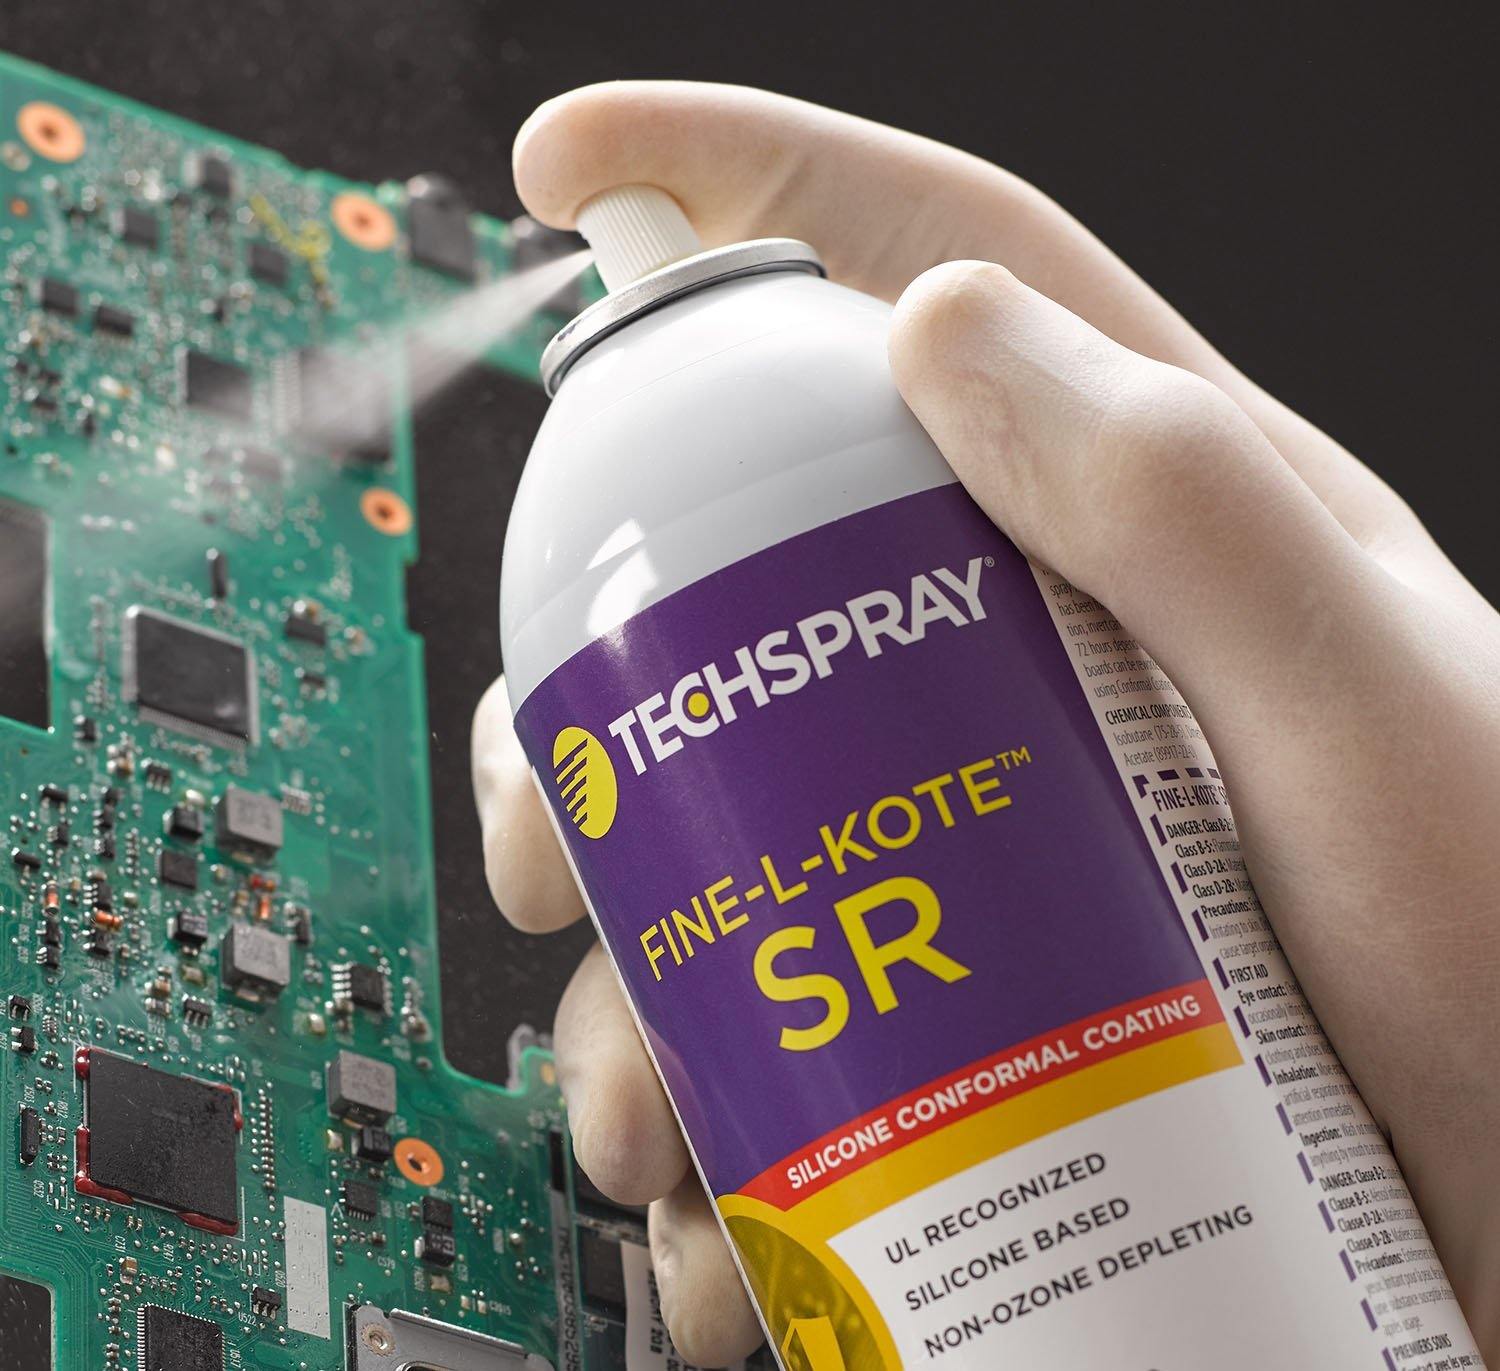 Applying Techspray Fine-L-Kote SR Conformal Coating 2102-12S 12 Oz (355ml) provides good chemical resistance, moisture and salt spray resistance, and is very flexible